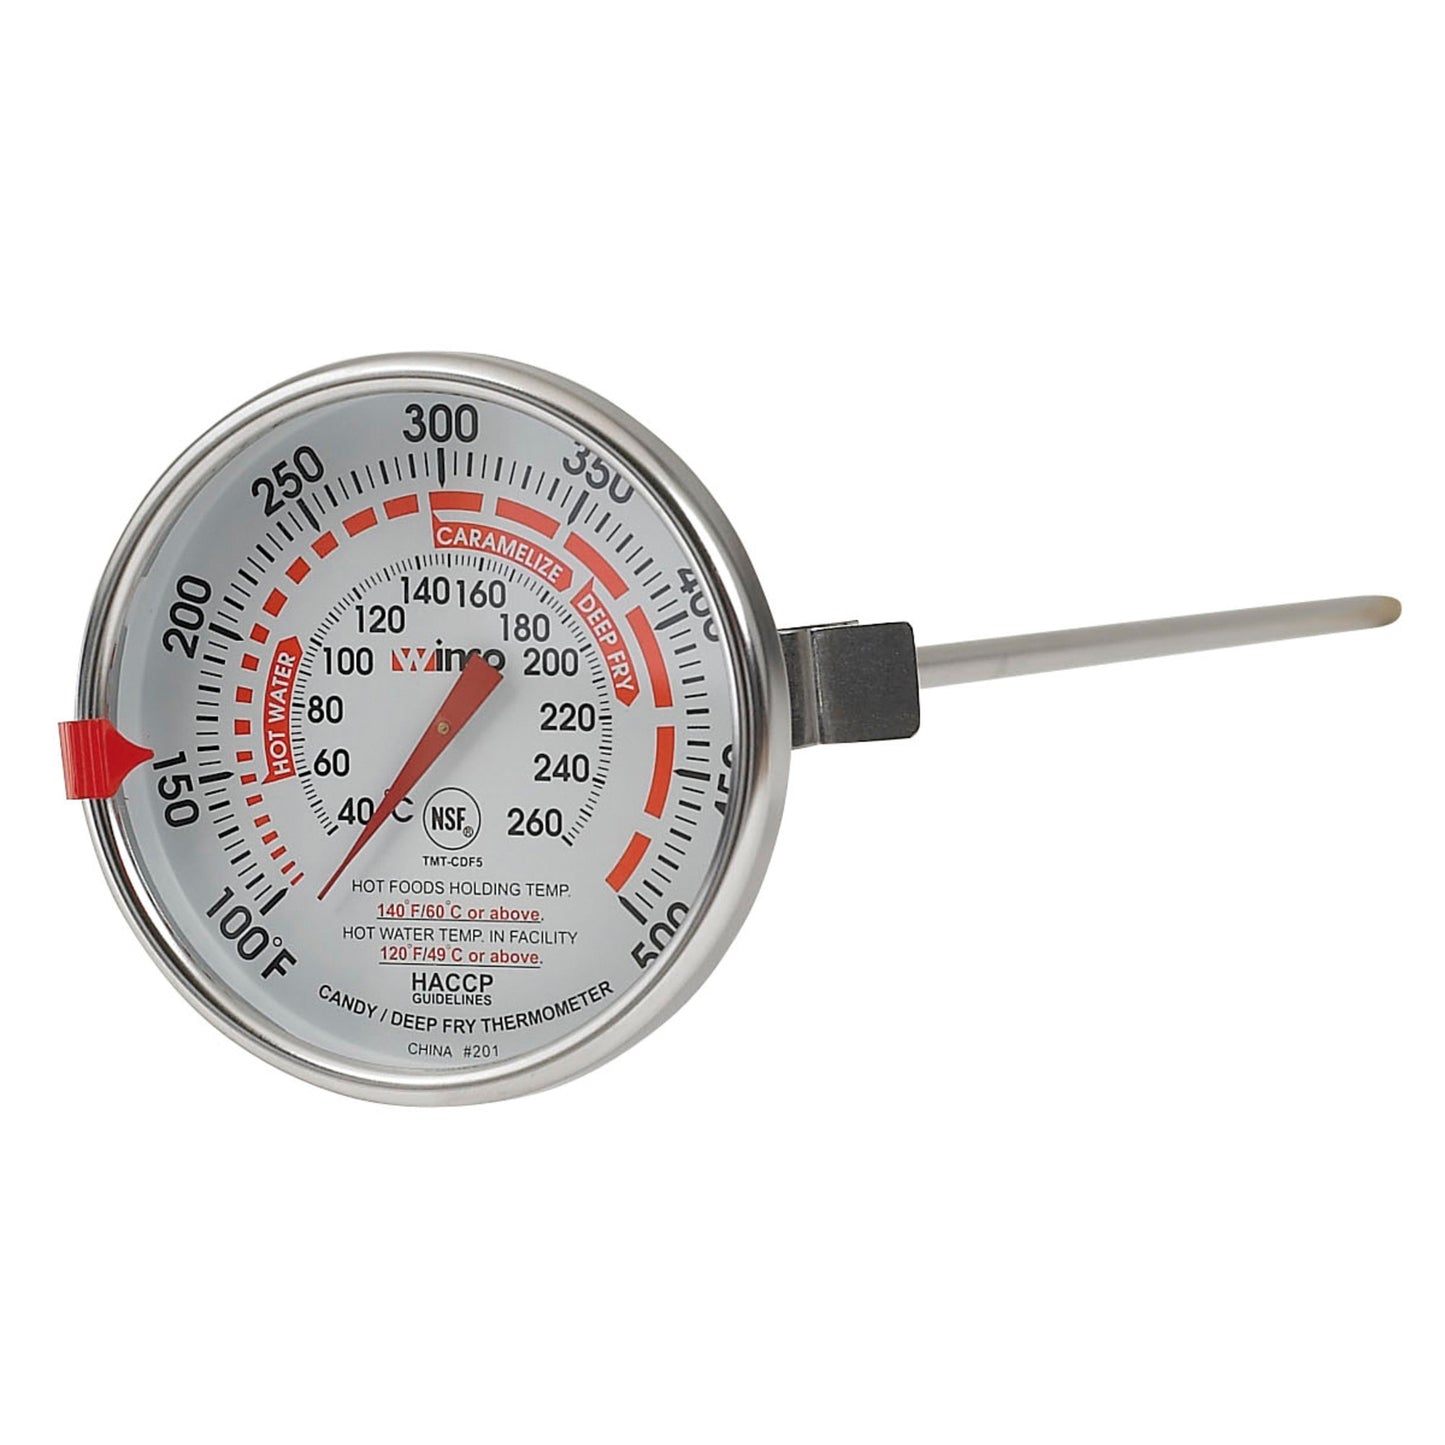 TMT-CDF5 - Candy/Deep Fryer Thermometer - 3", 12"